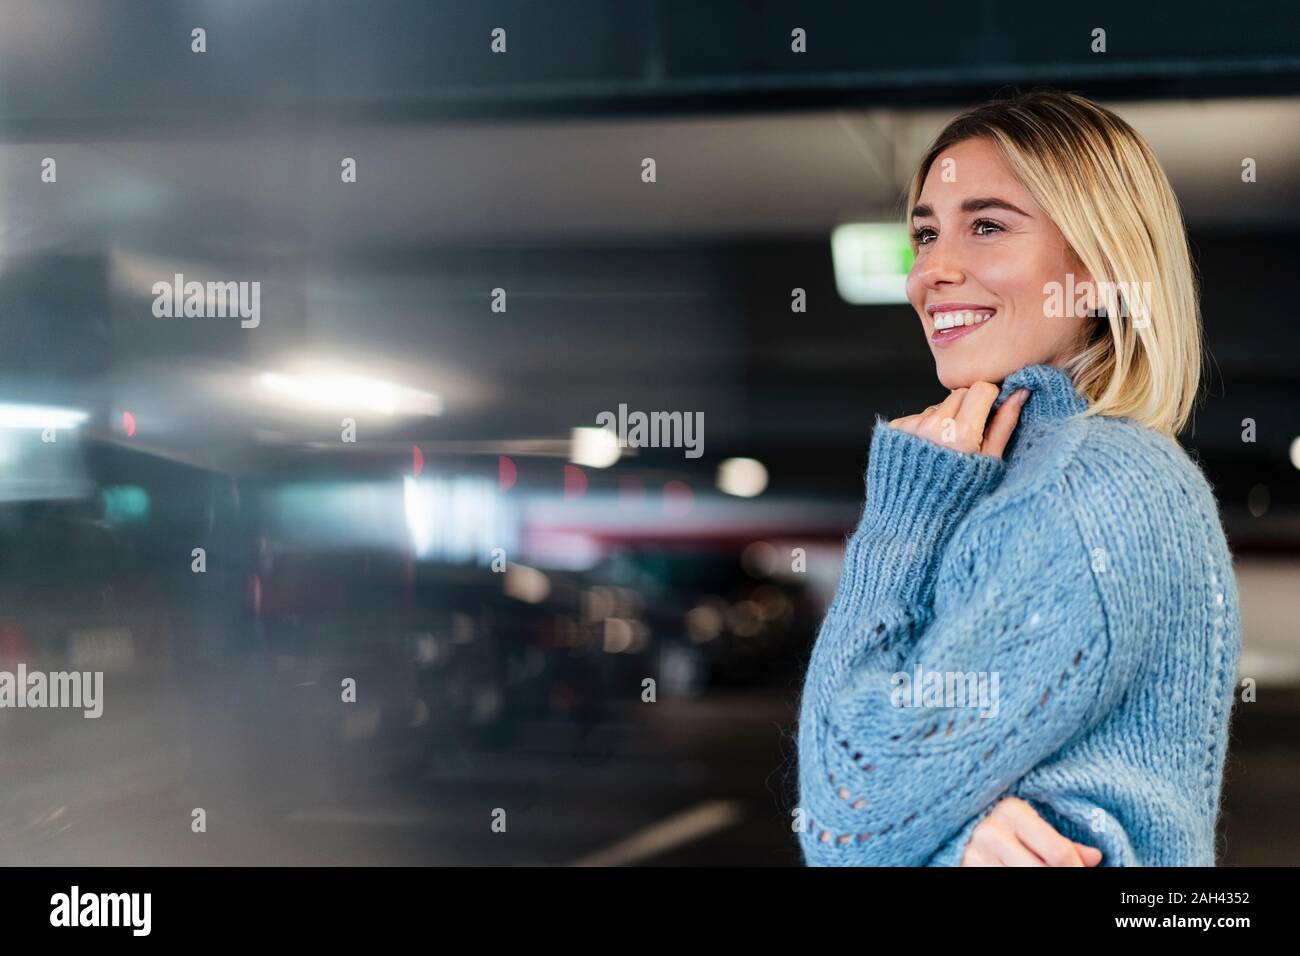 Portrait of a smiling young woman in a parking garage Stock Photo